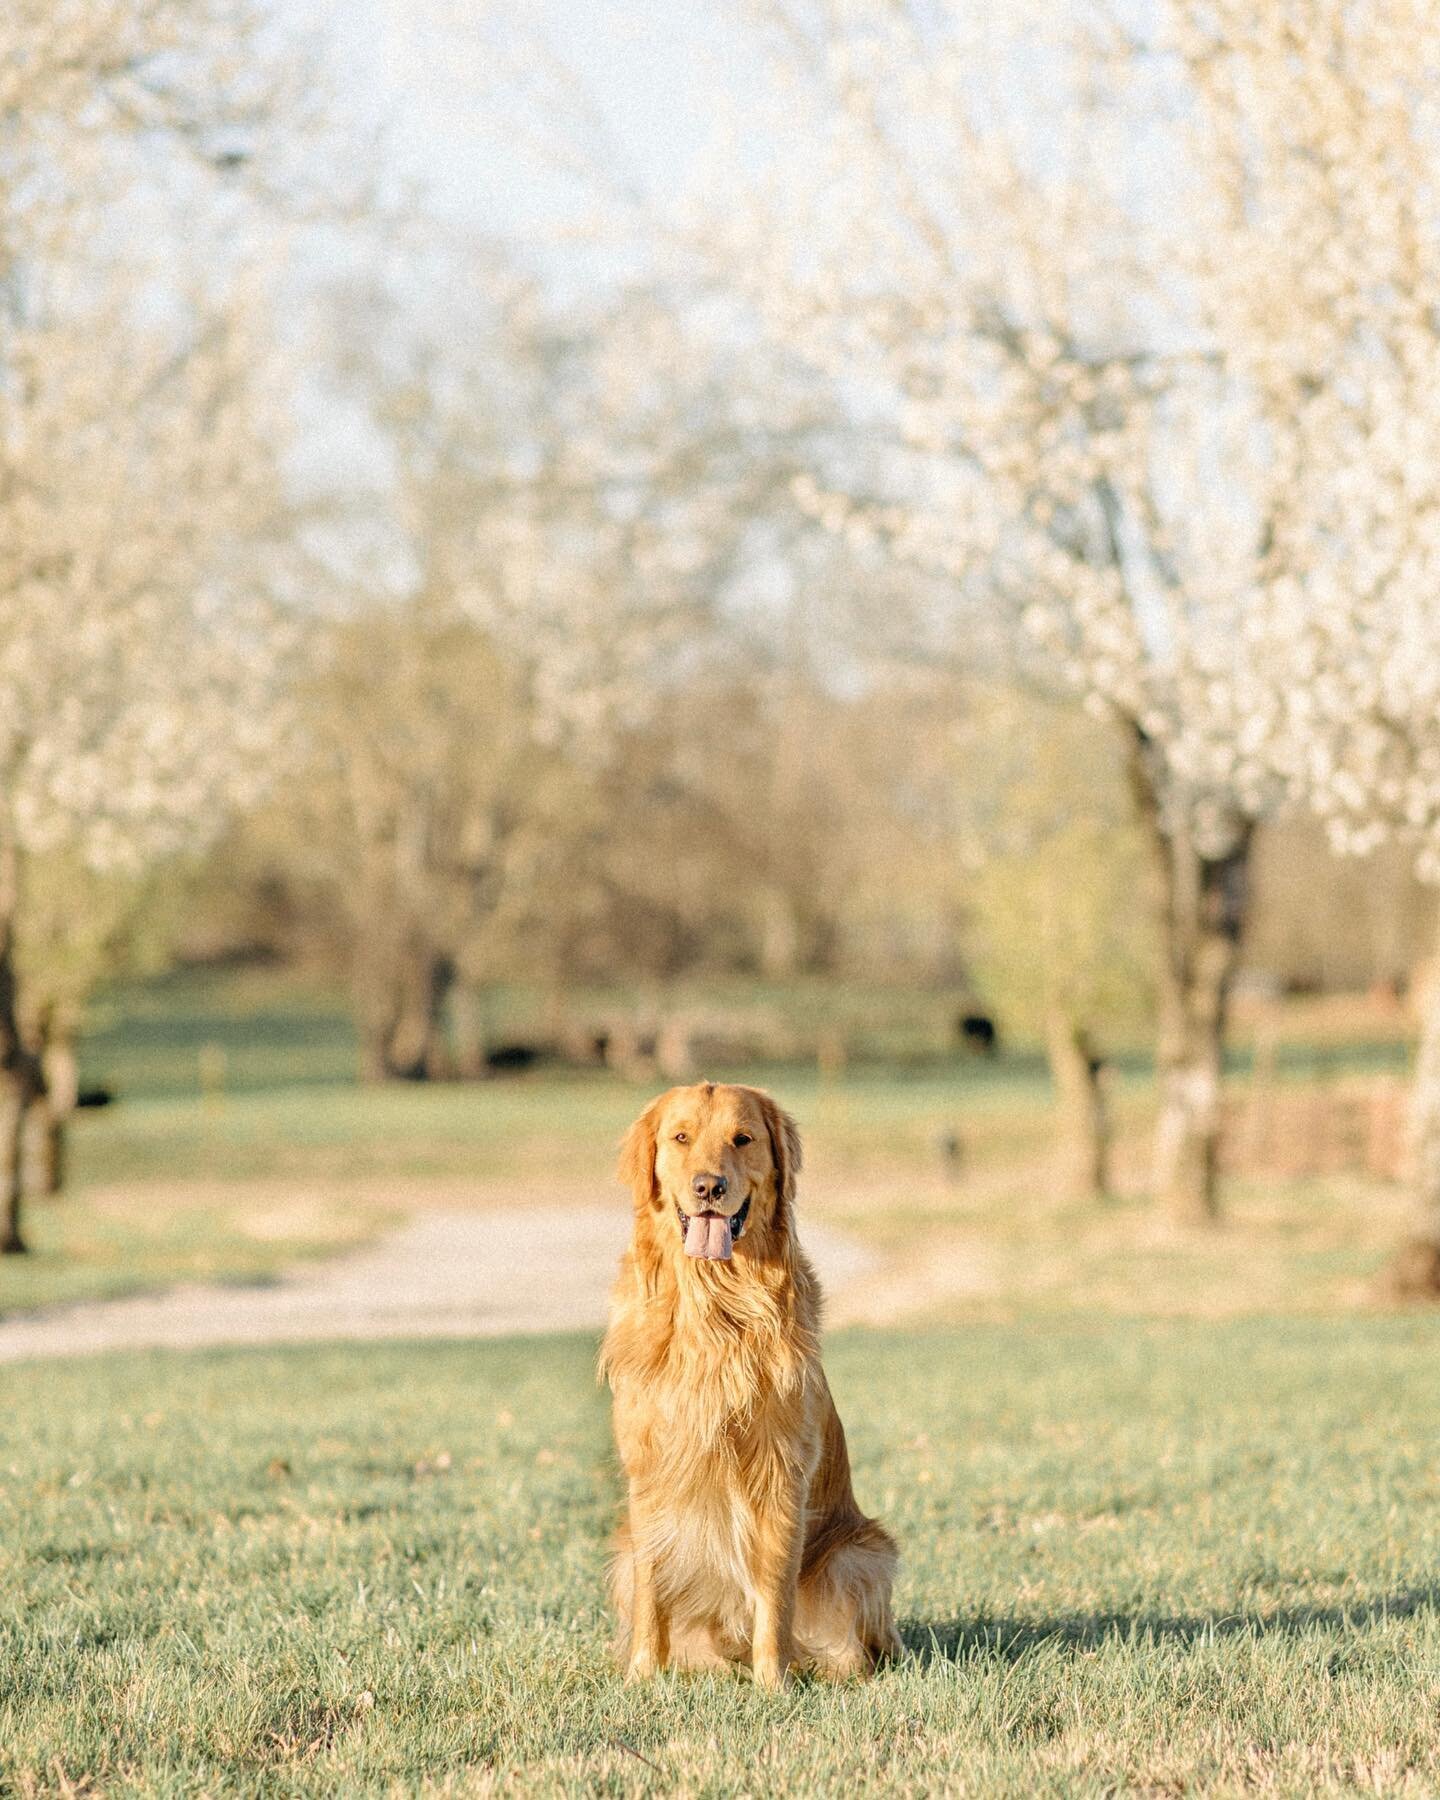 When spring comes early in Tennessee, you grab your camera and pose your pup.☀️

I took these photos early last week and dang am I excited for all the beautiful spring sessions coming so soon! There&rsquo;s nothing quite like the soft spring flowers 